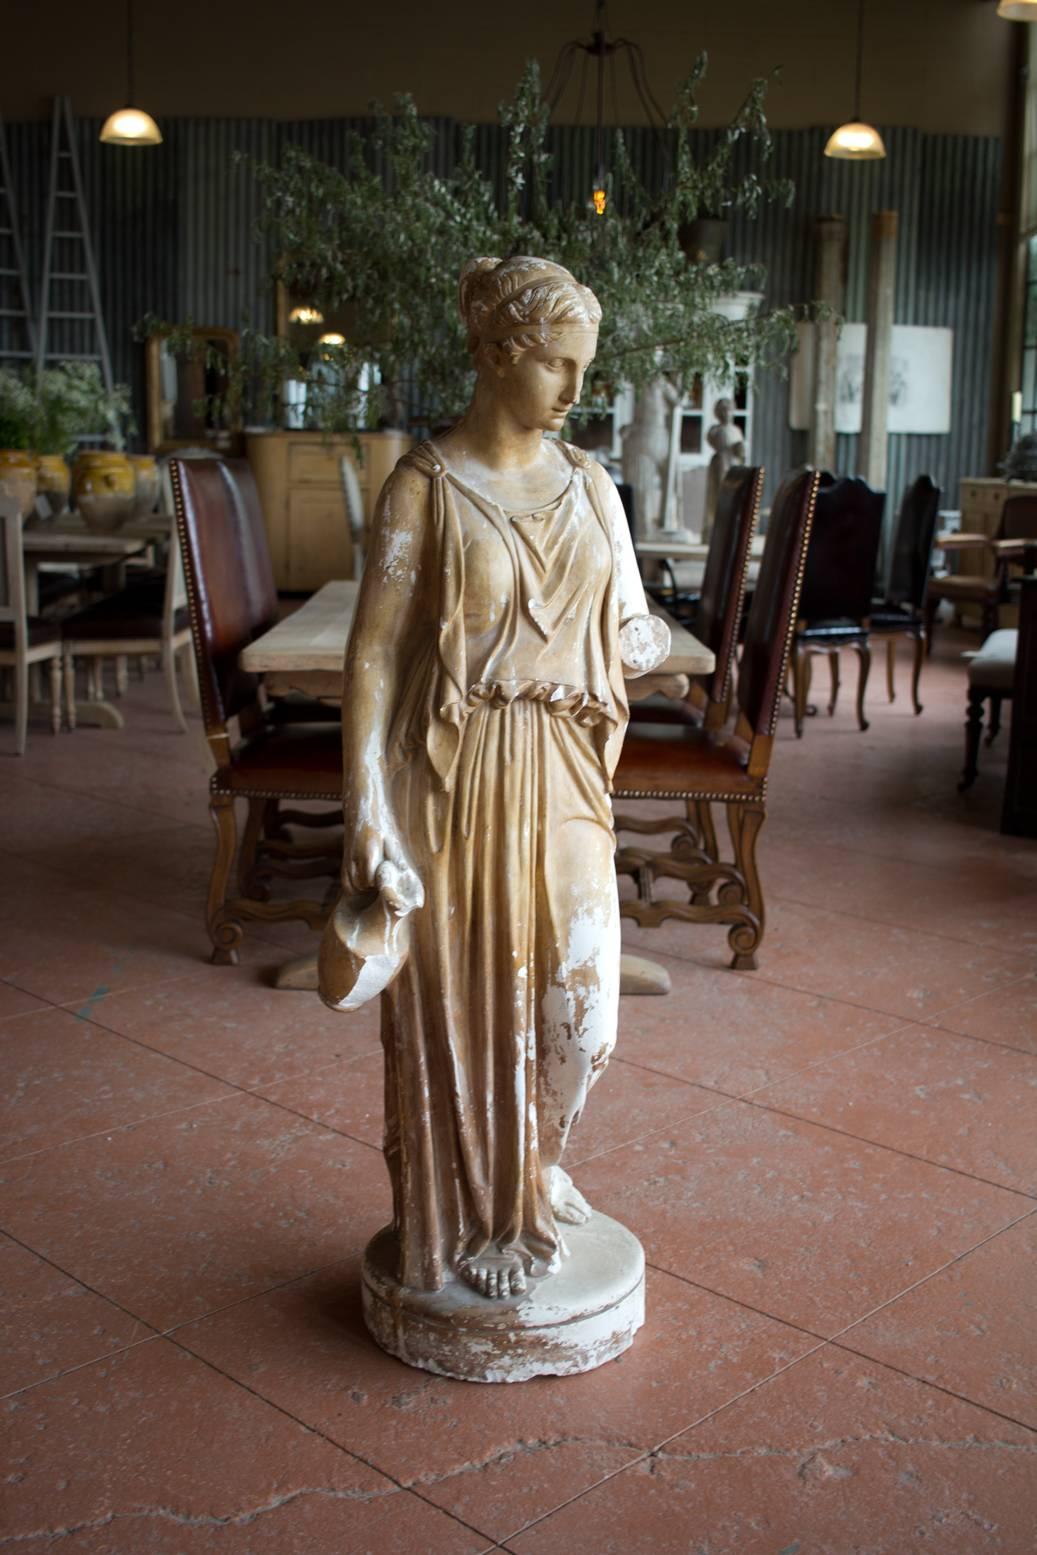 Wonderful antique study in plaster of the beautiful Greek goddess Hebe. Her hand is detached. We liked her without the hand, but we will include it!

She was the goddess of youth and the cupbearer of the gods who served ambrosia at the heavenly